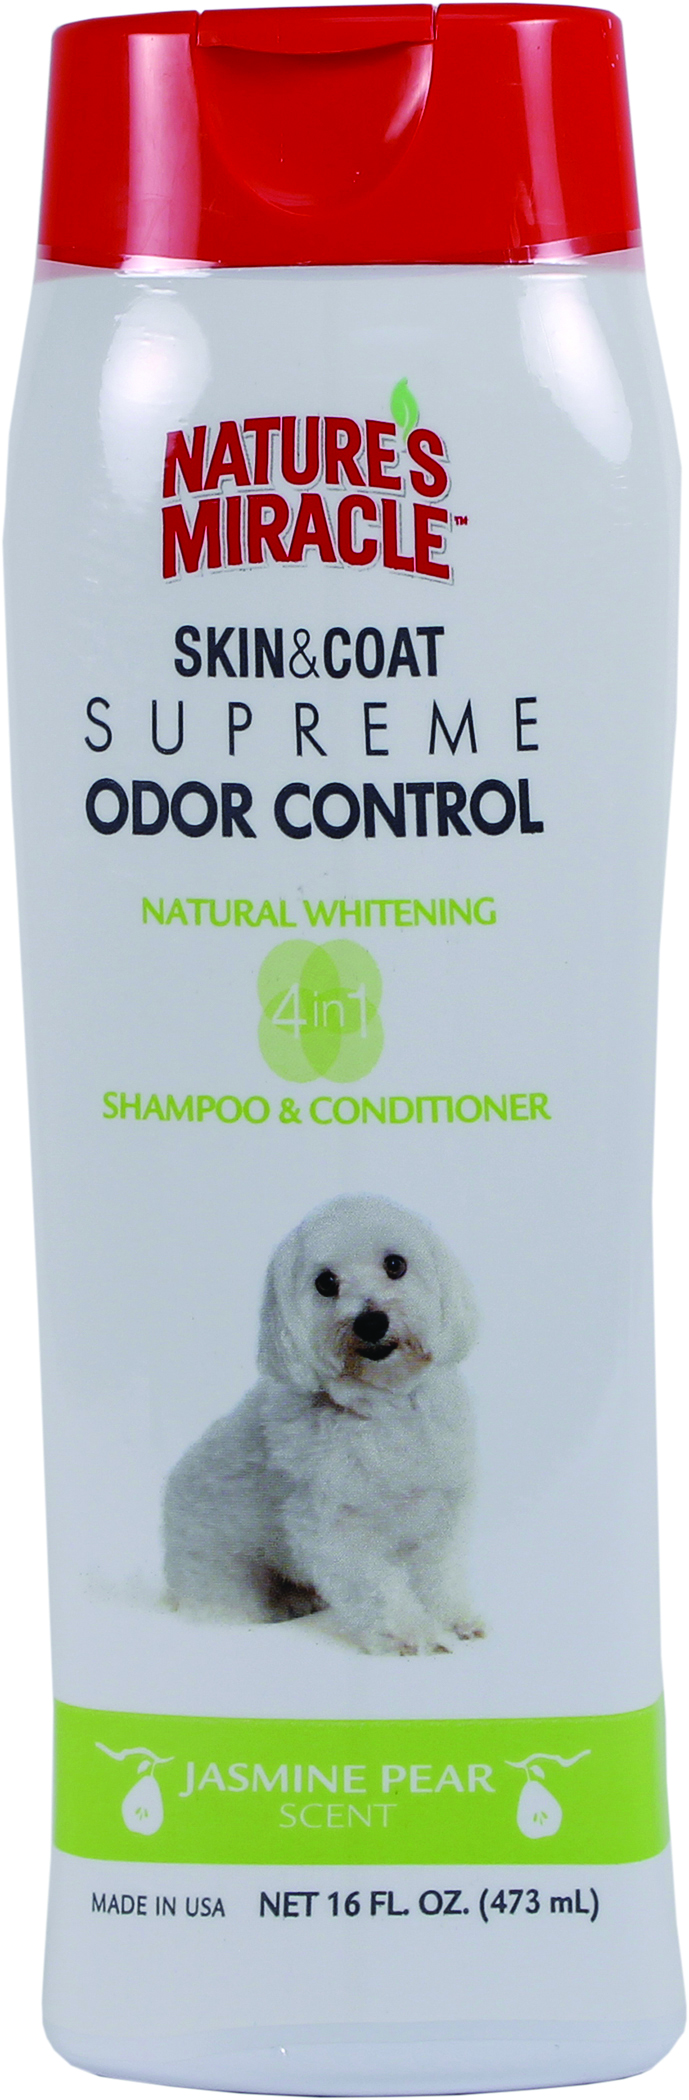 NATURES MIRACLE SUPREME ODOR CONTROL WHITENING